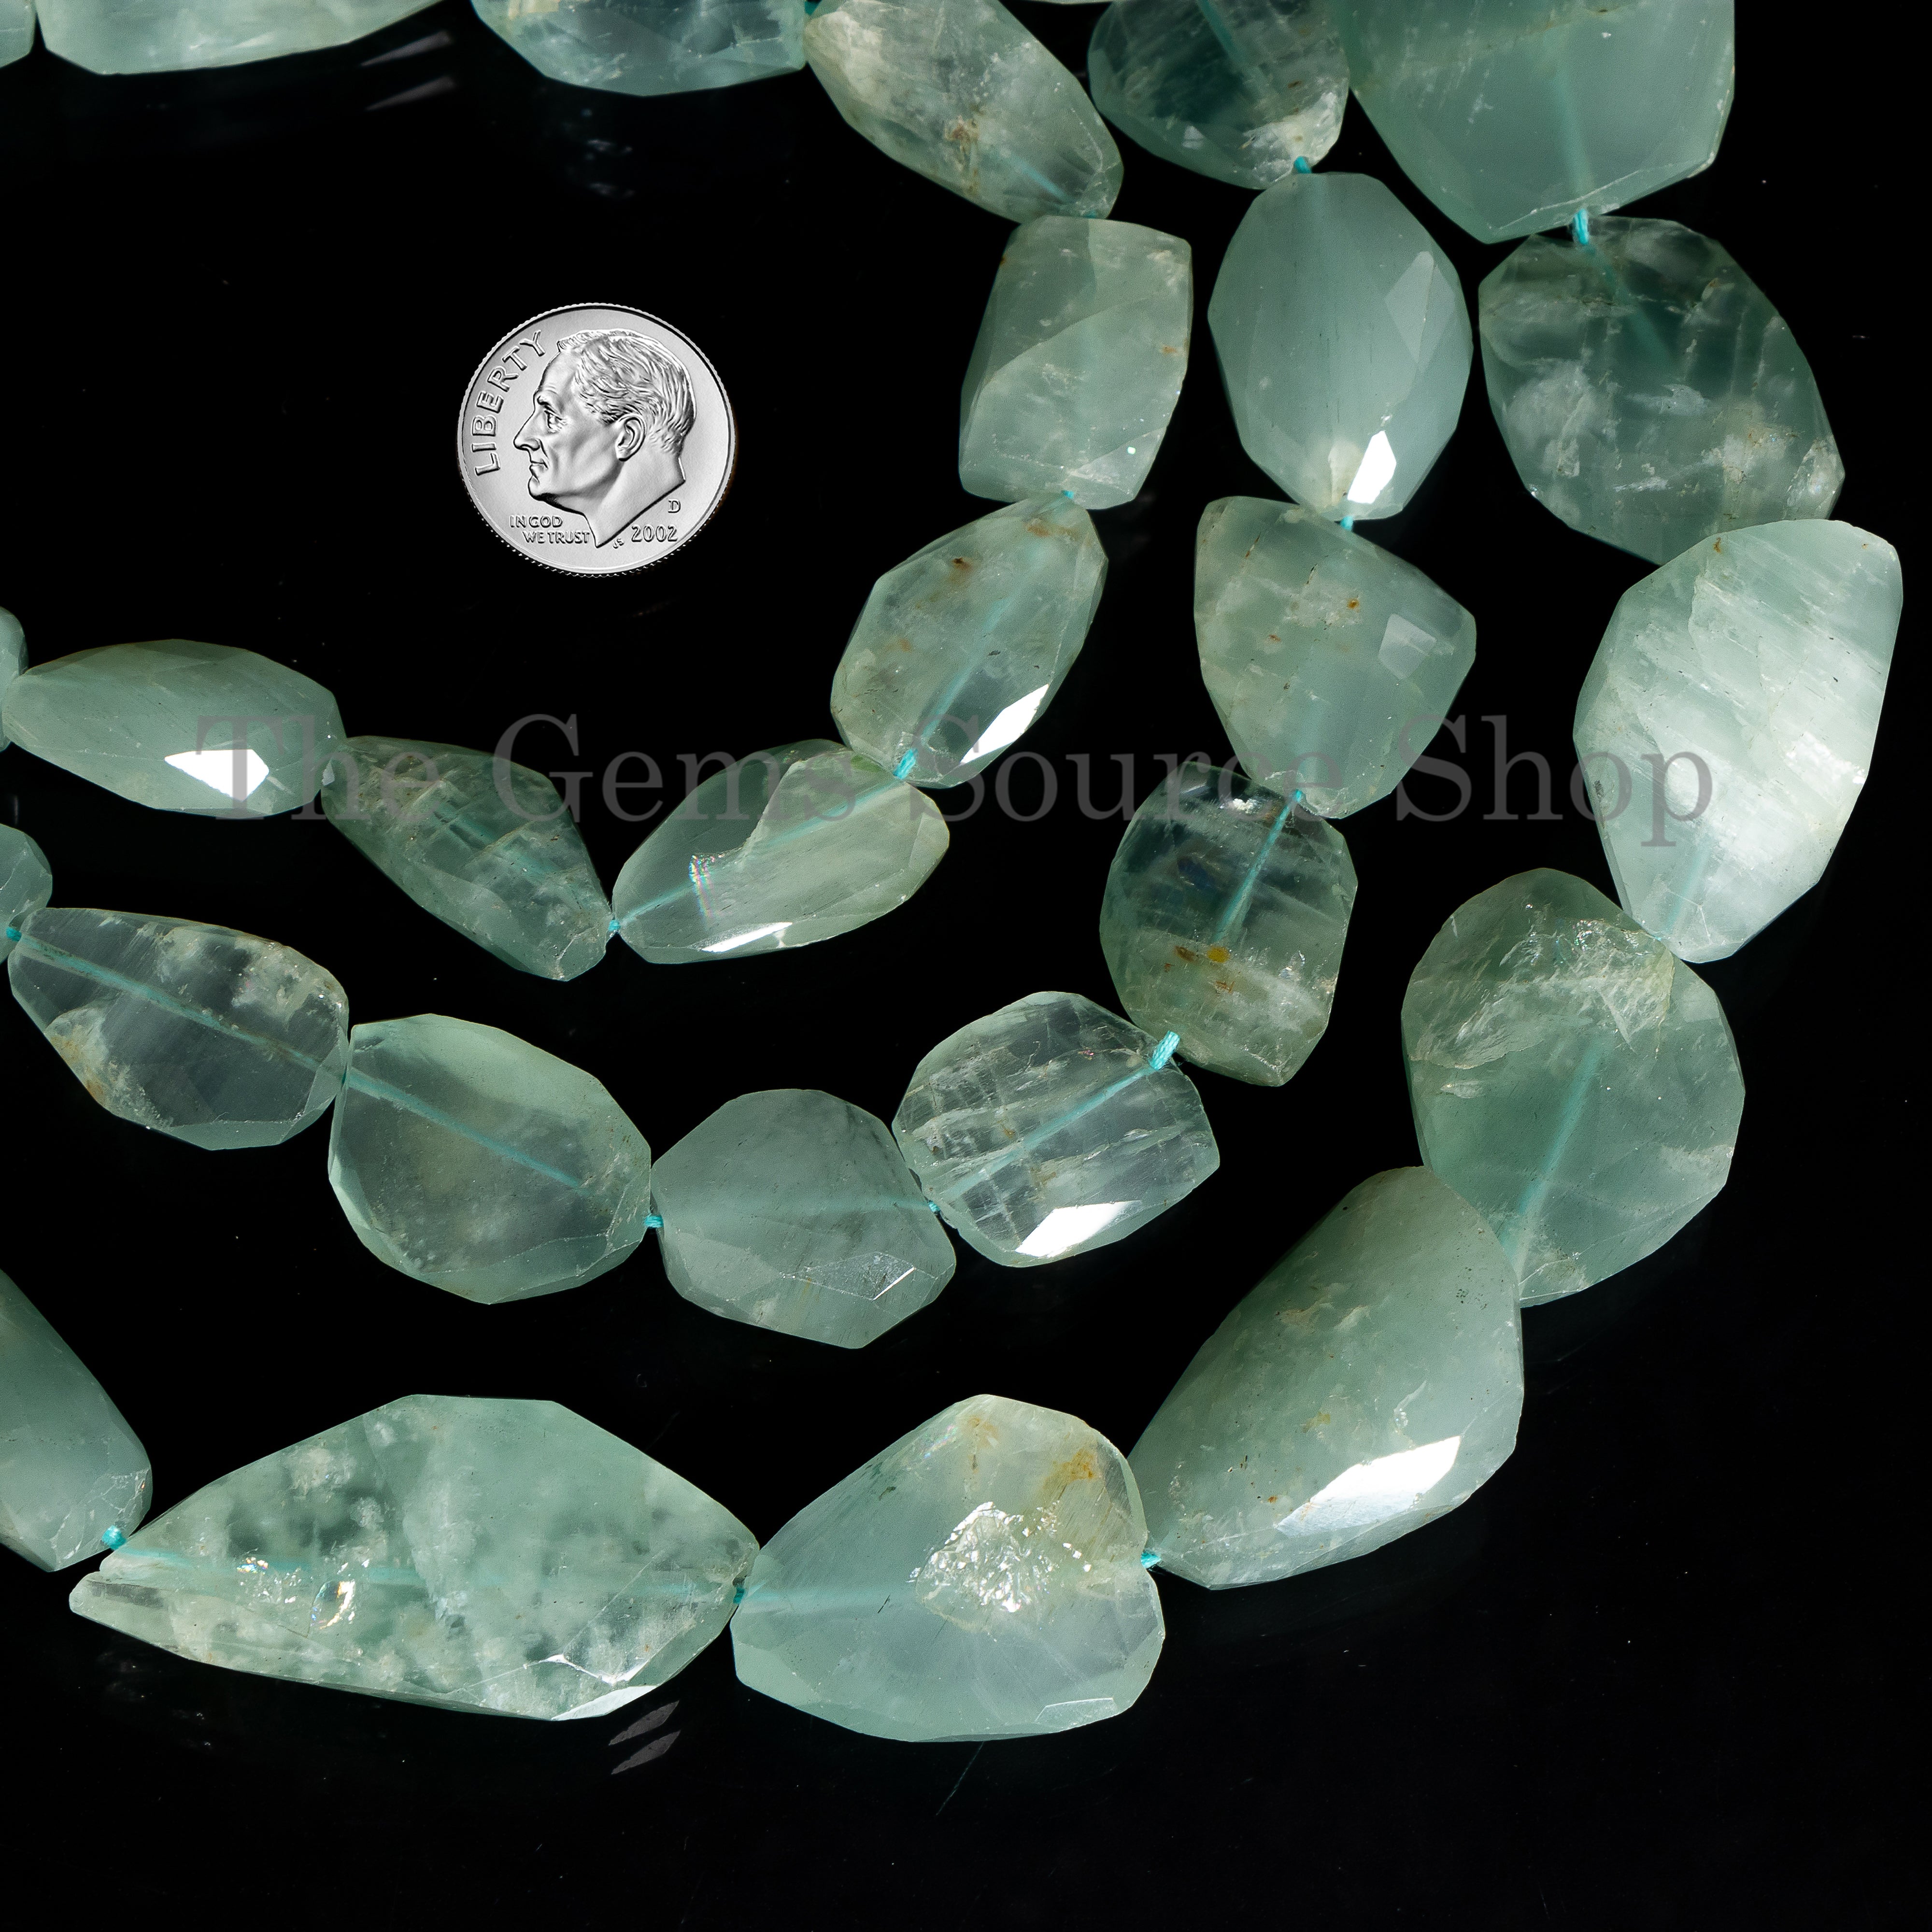 Natural Aquamarine Nuggets Faceted Beads, Aquamarine Gemstone Nuggets Wholesale Beads for Jewelry Making. TGS-5148